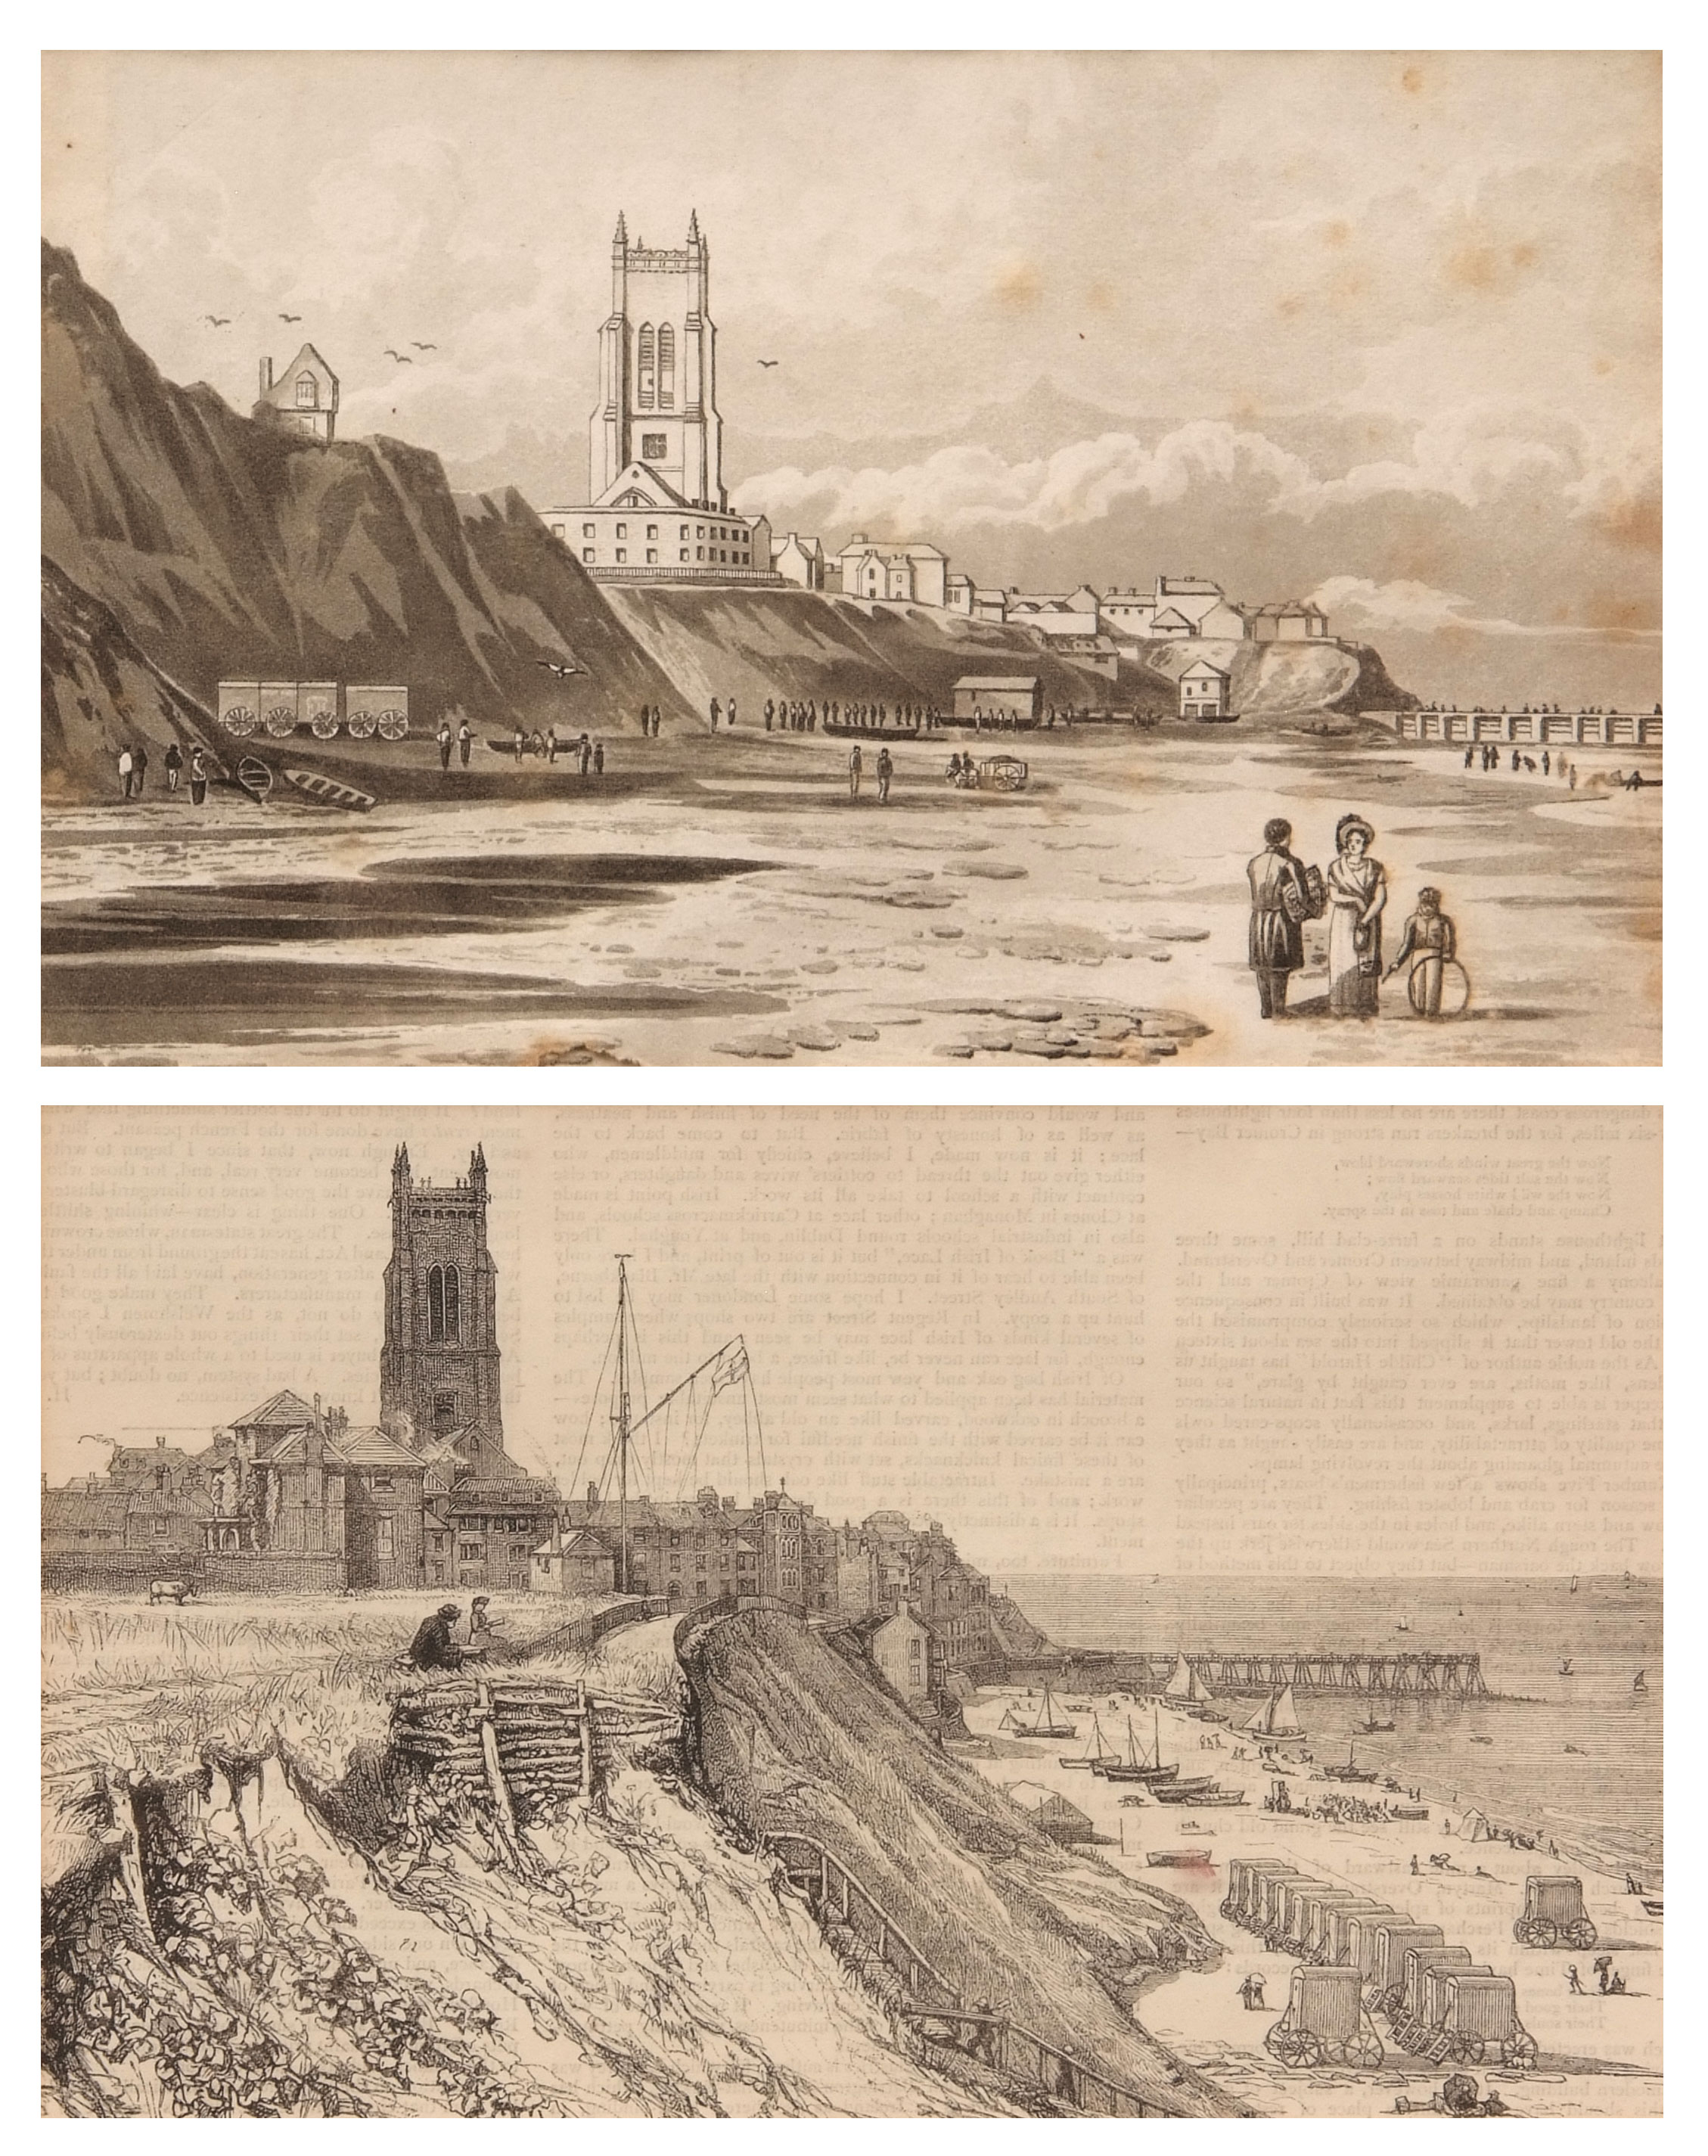 After J M Johnson, printed by C Hullmandel, "Colne House, Cromer", "Cromer", two black and white